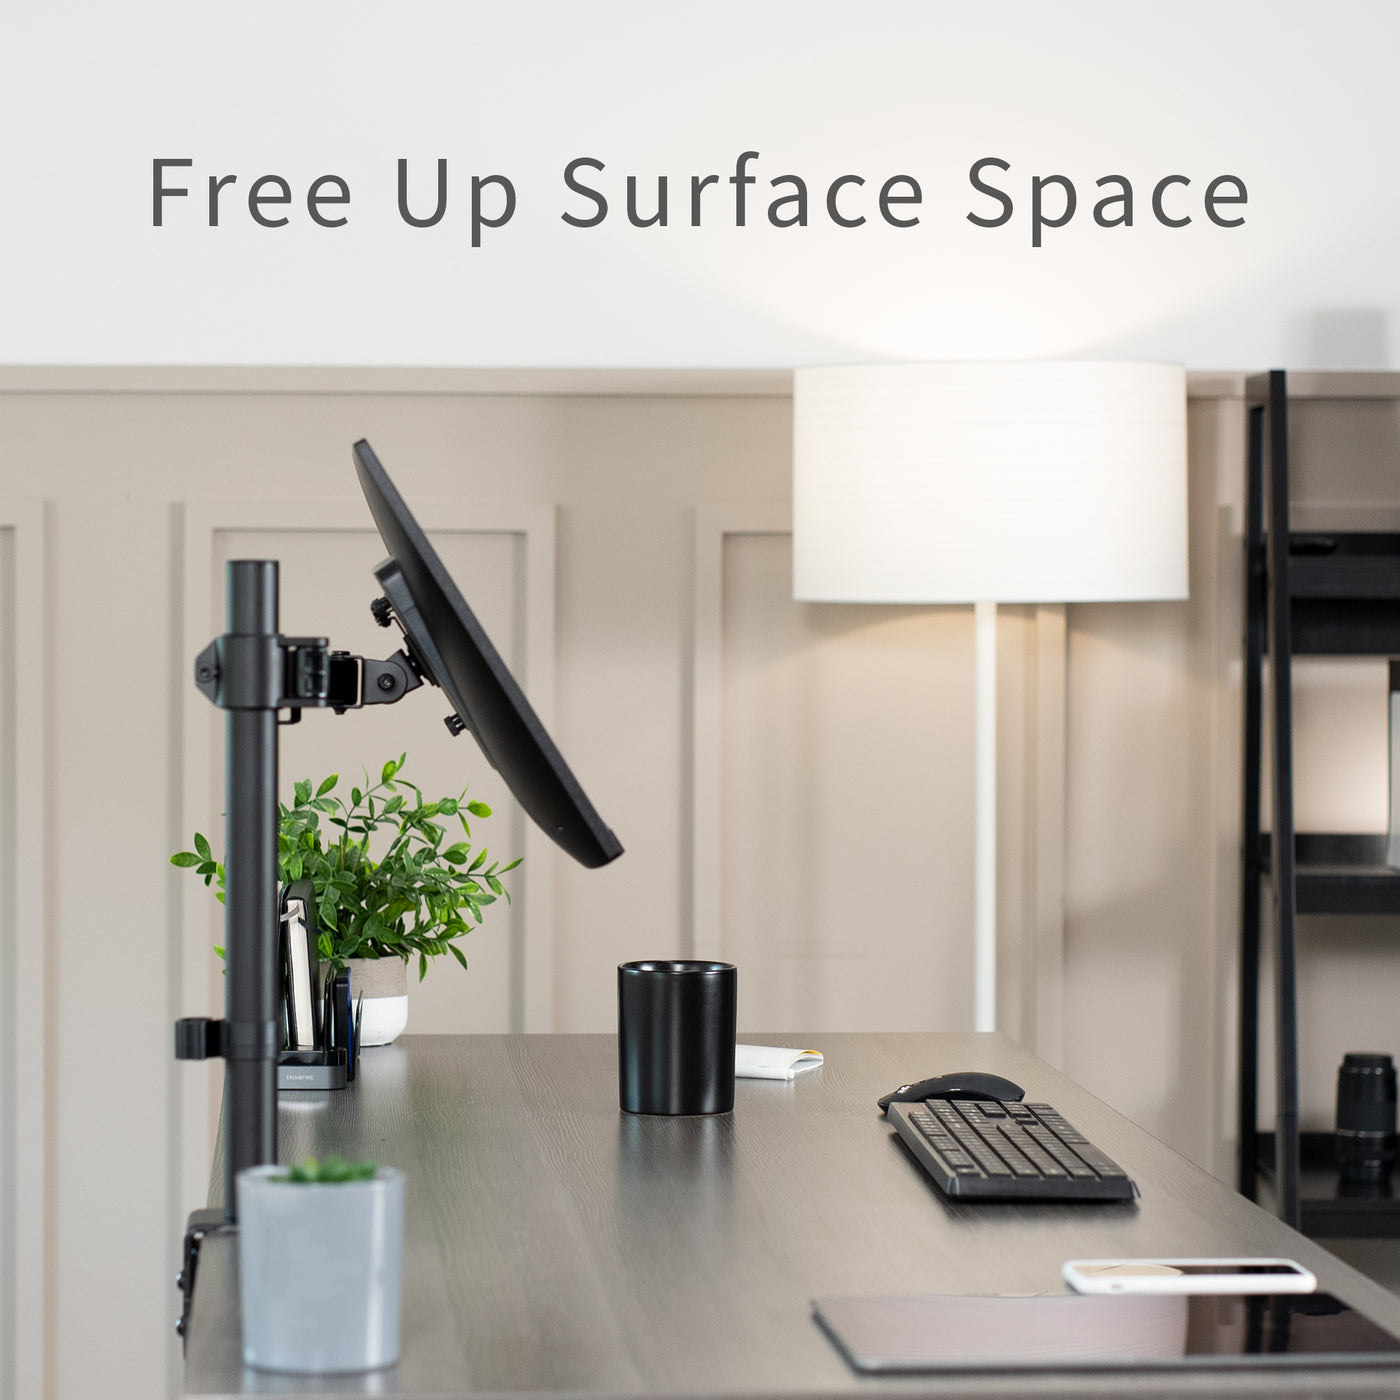 Free up surface space by elevating your monitor off of your main desktop surface.